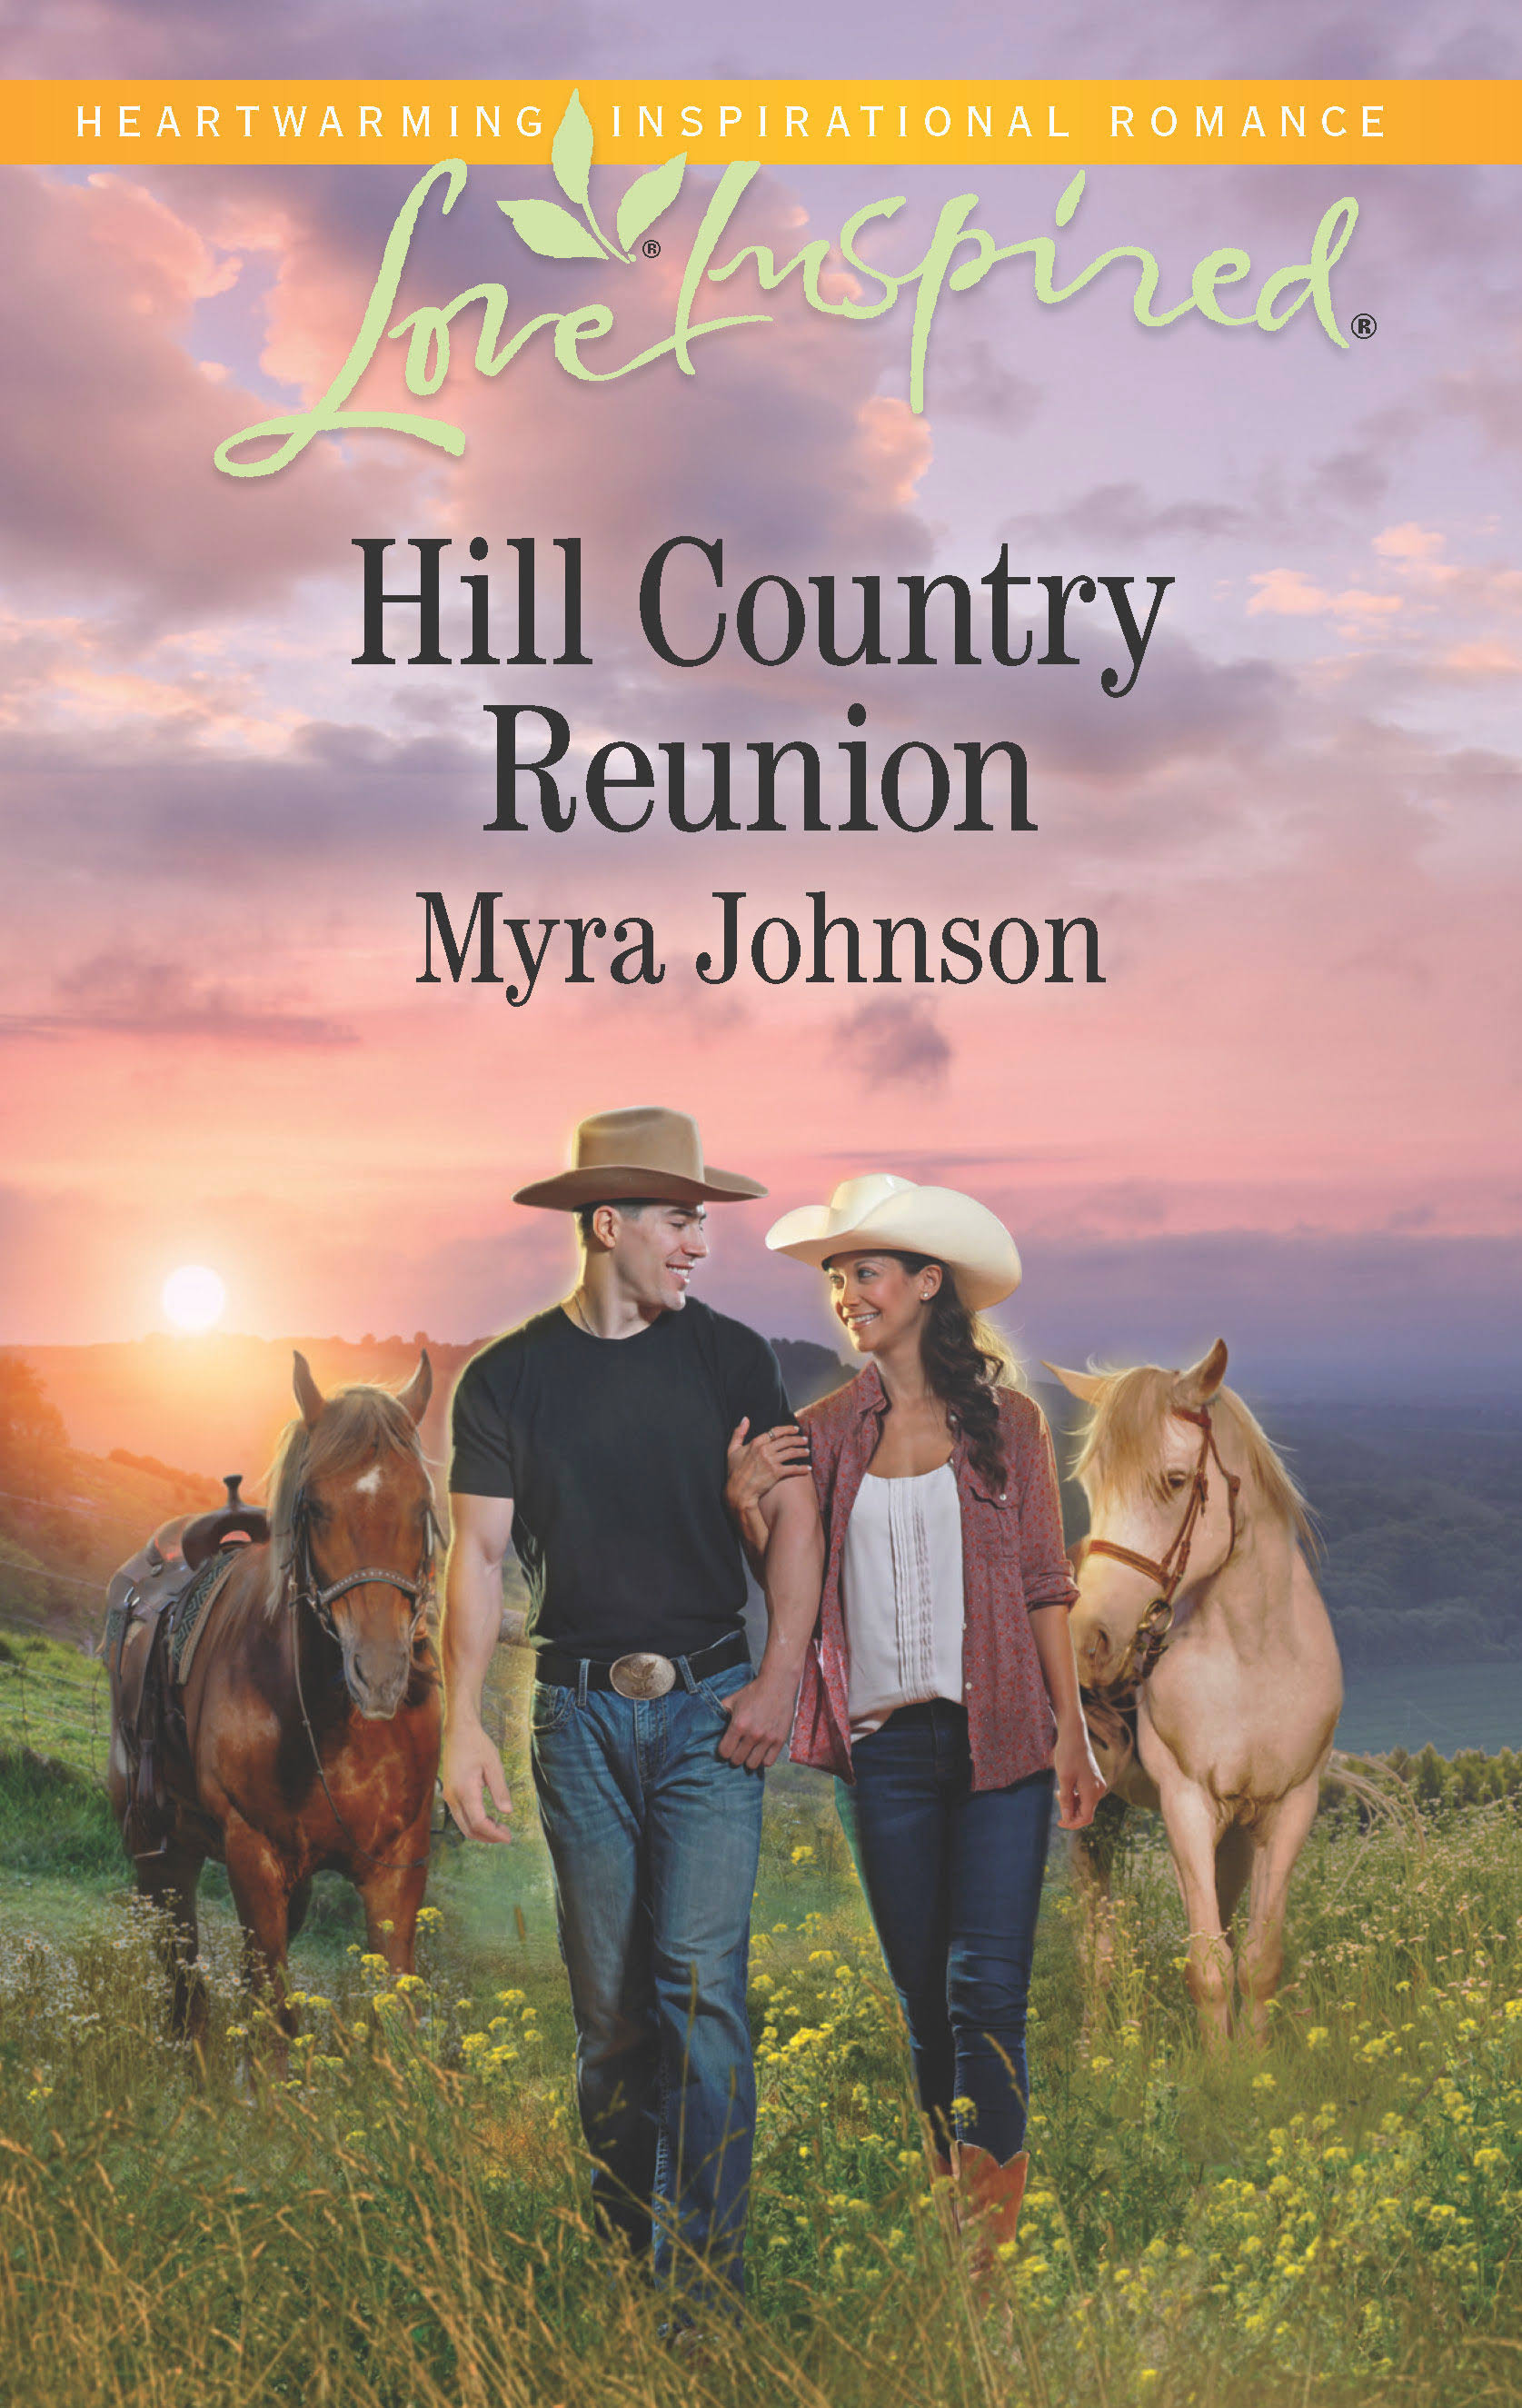 Hill Country Reunion [Book]